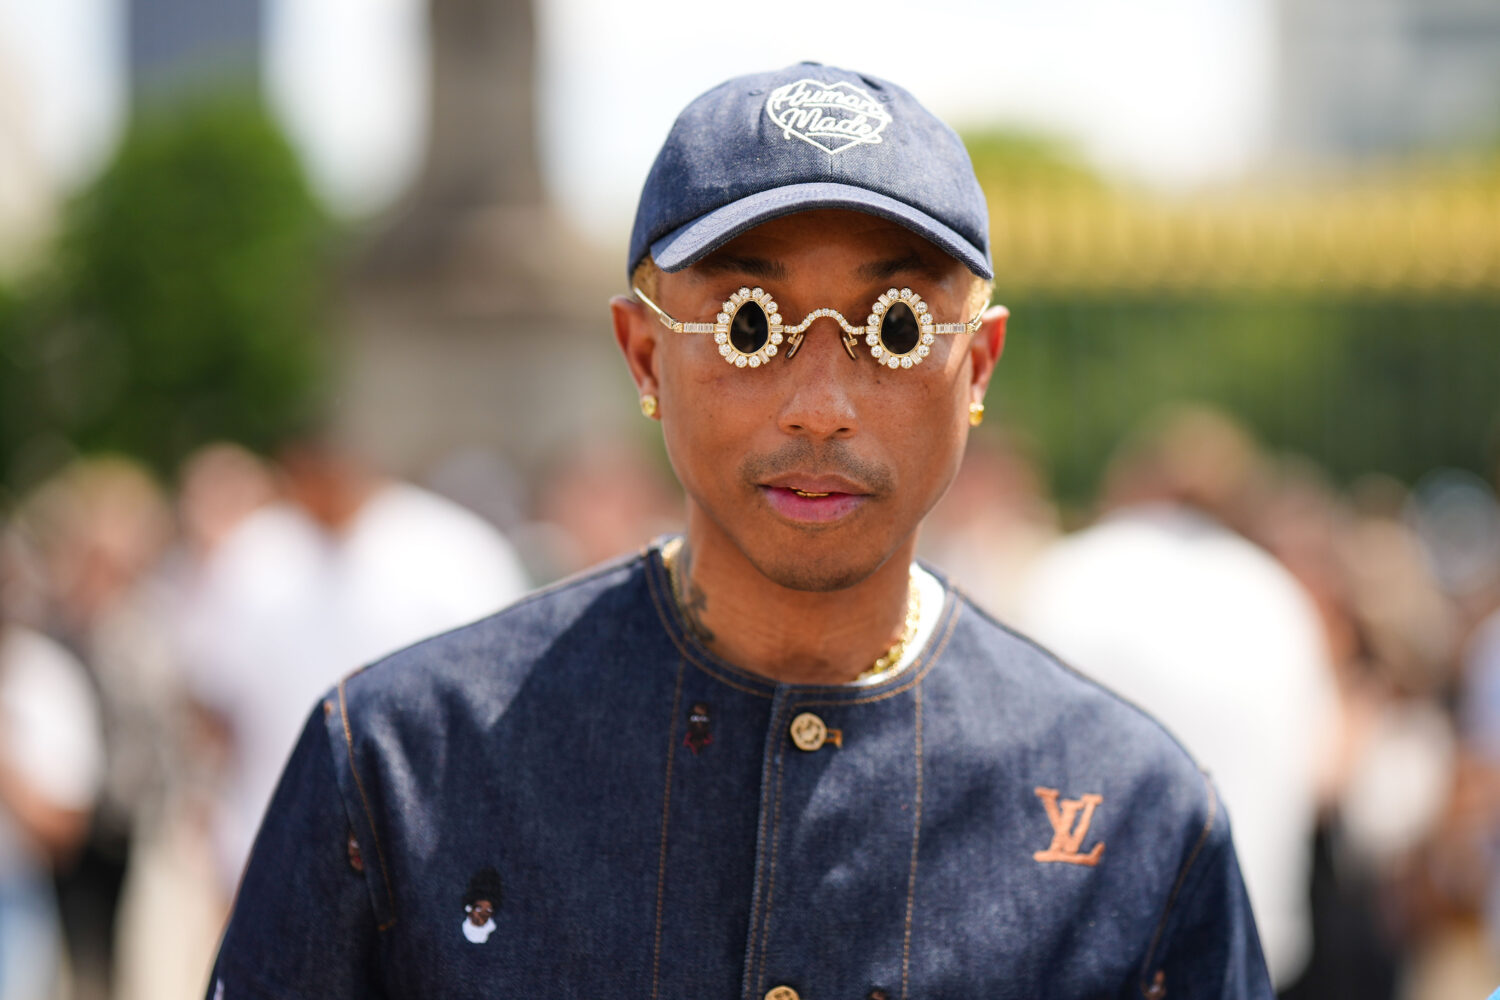 Nico and Pharrell Williams during Louis Vuitton and Interview